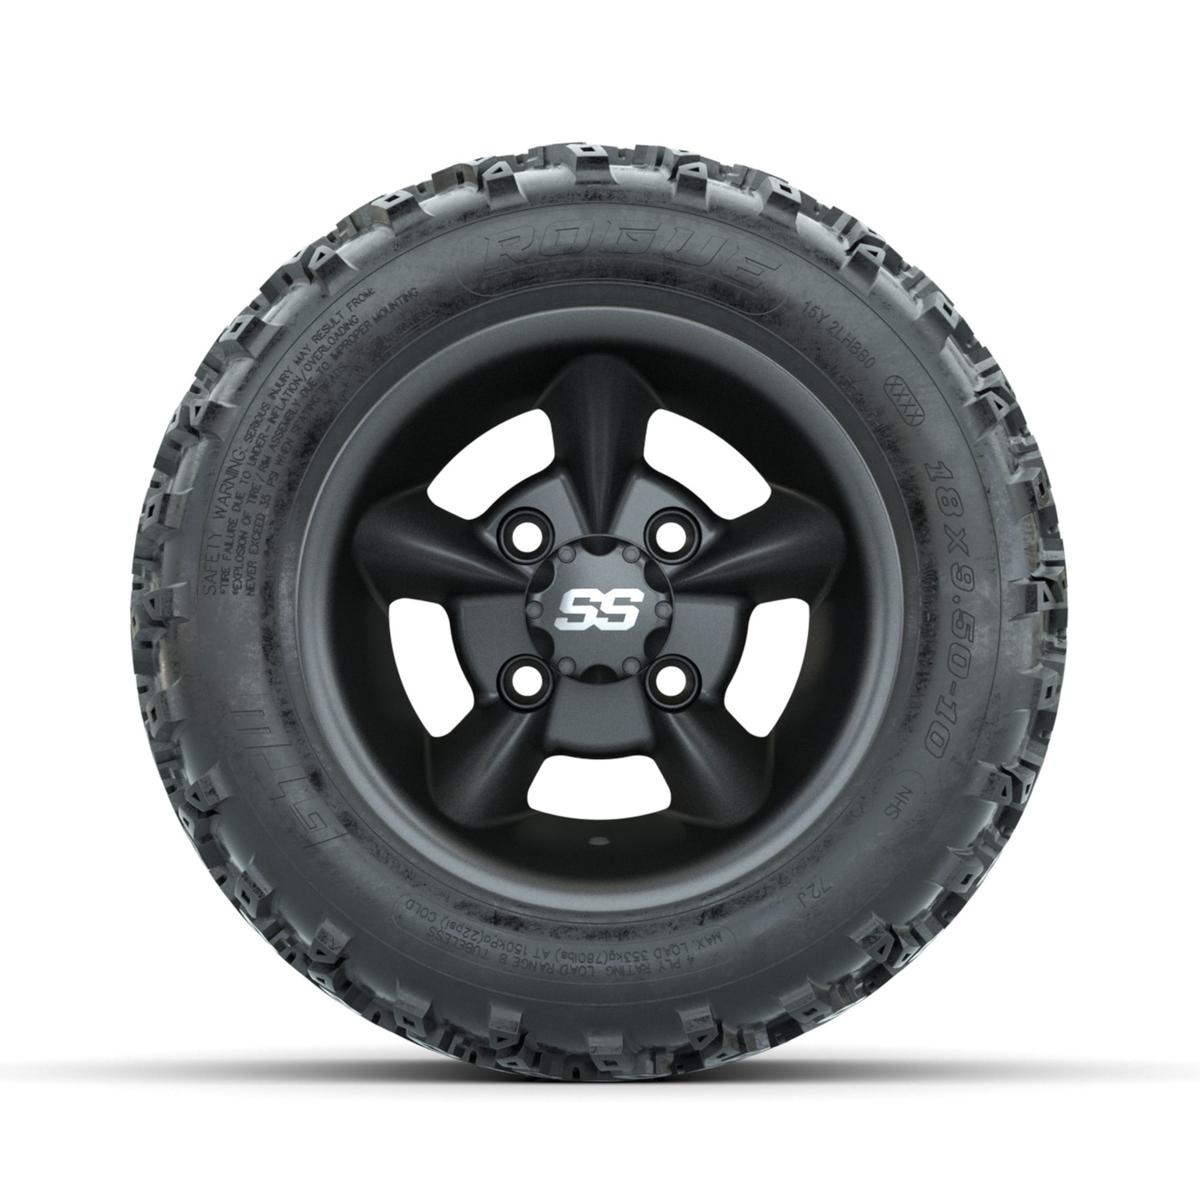 GTW Godfather Matte Grey 10 in Wheels with 18x9.50-10 Rogue All Terrain Tires – Full Set